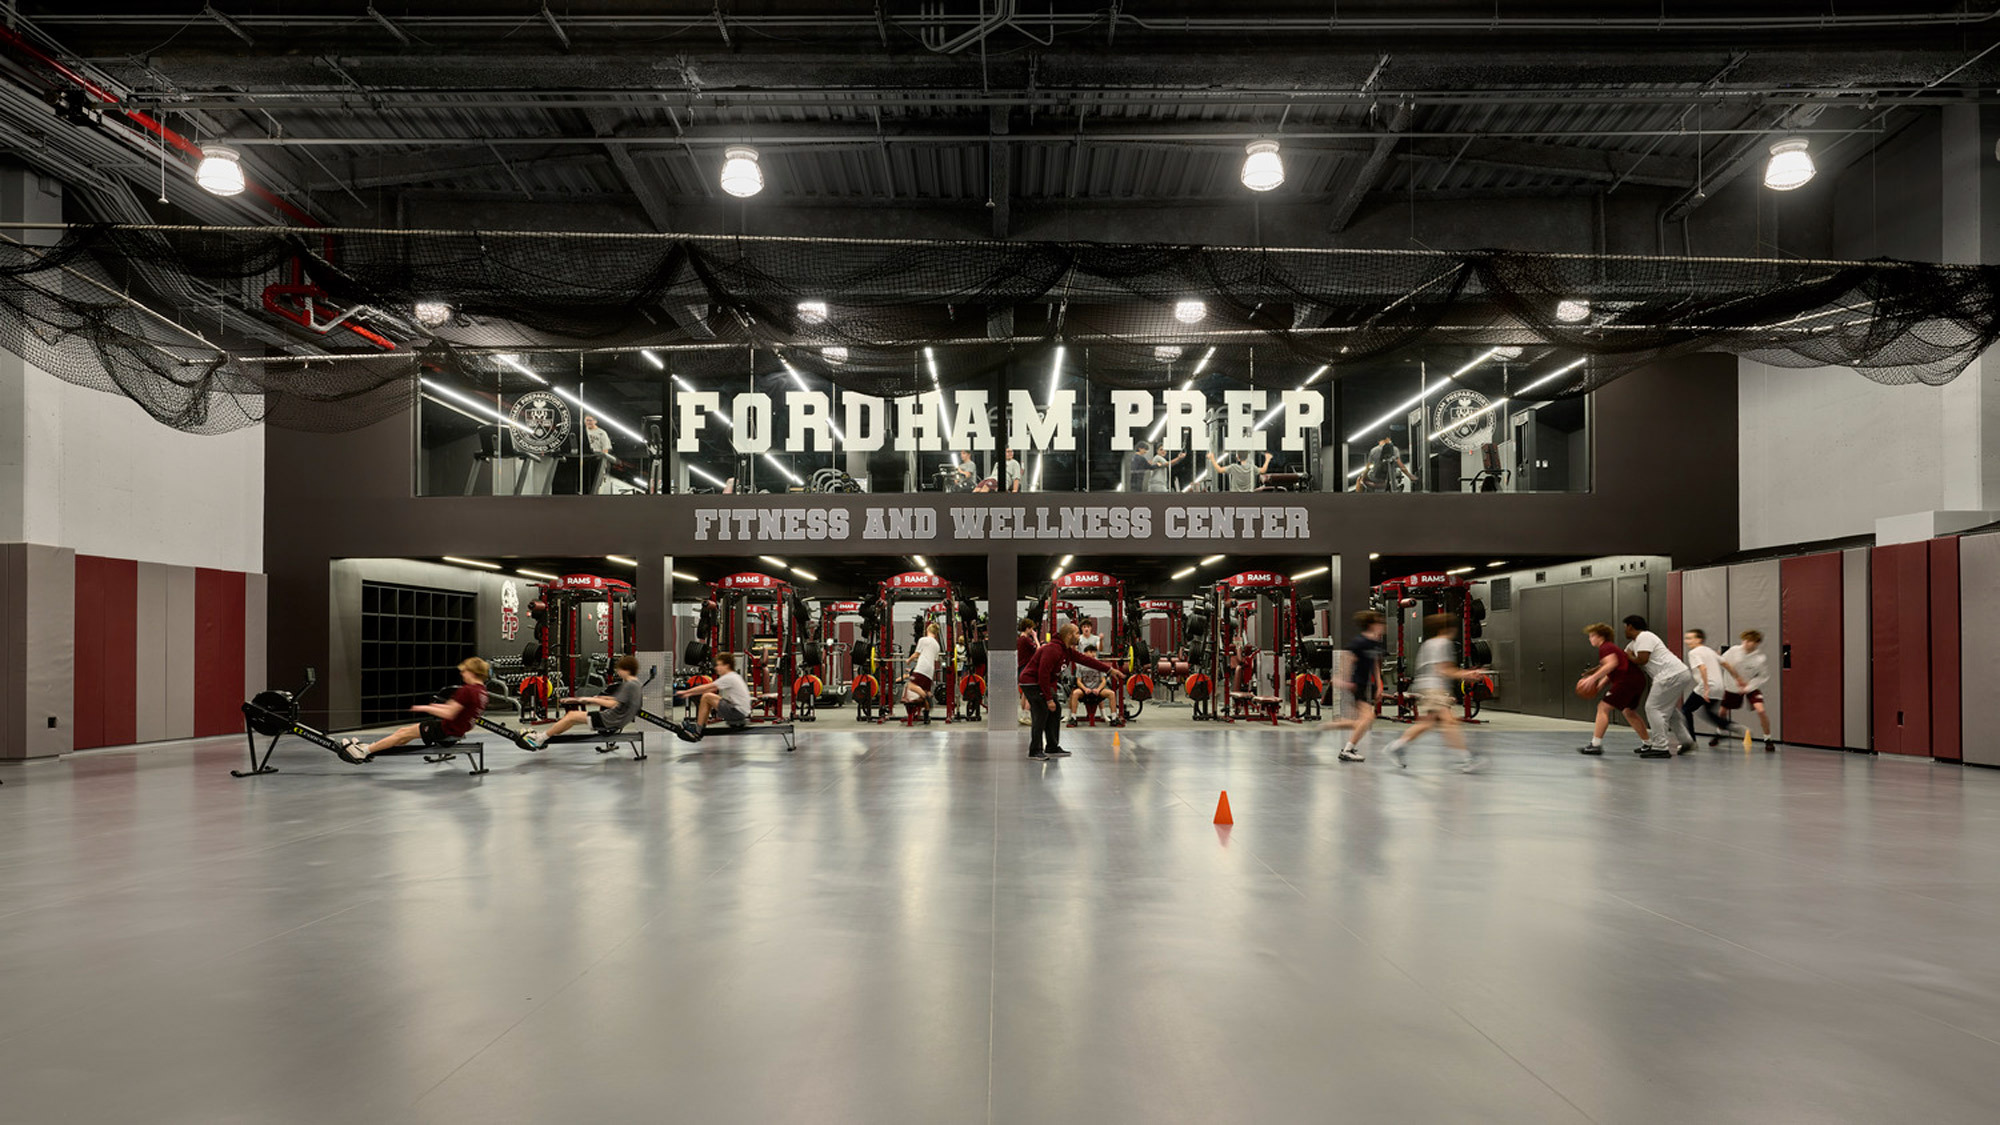 Modern fitness center with high ceilings, exposed ductwork, and industrial lighting. The space has a branded wall with "Fordham Prep Fitness and Wellness Center" and is equipped with cardio and weightlifting machines, balancing the aesthetics with functionality.